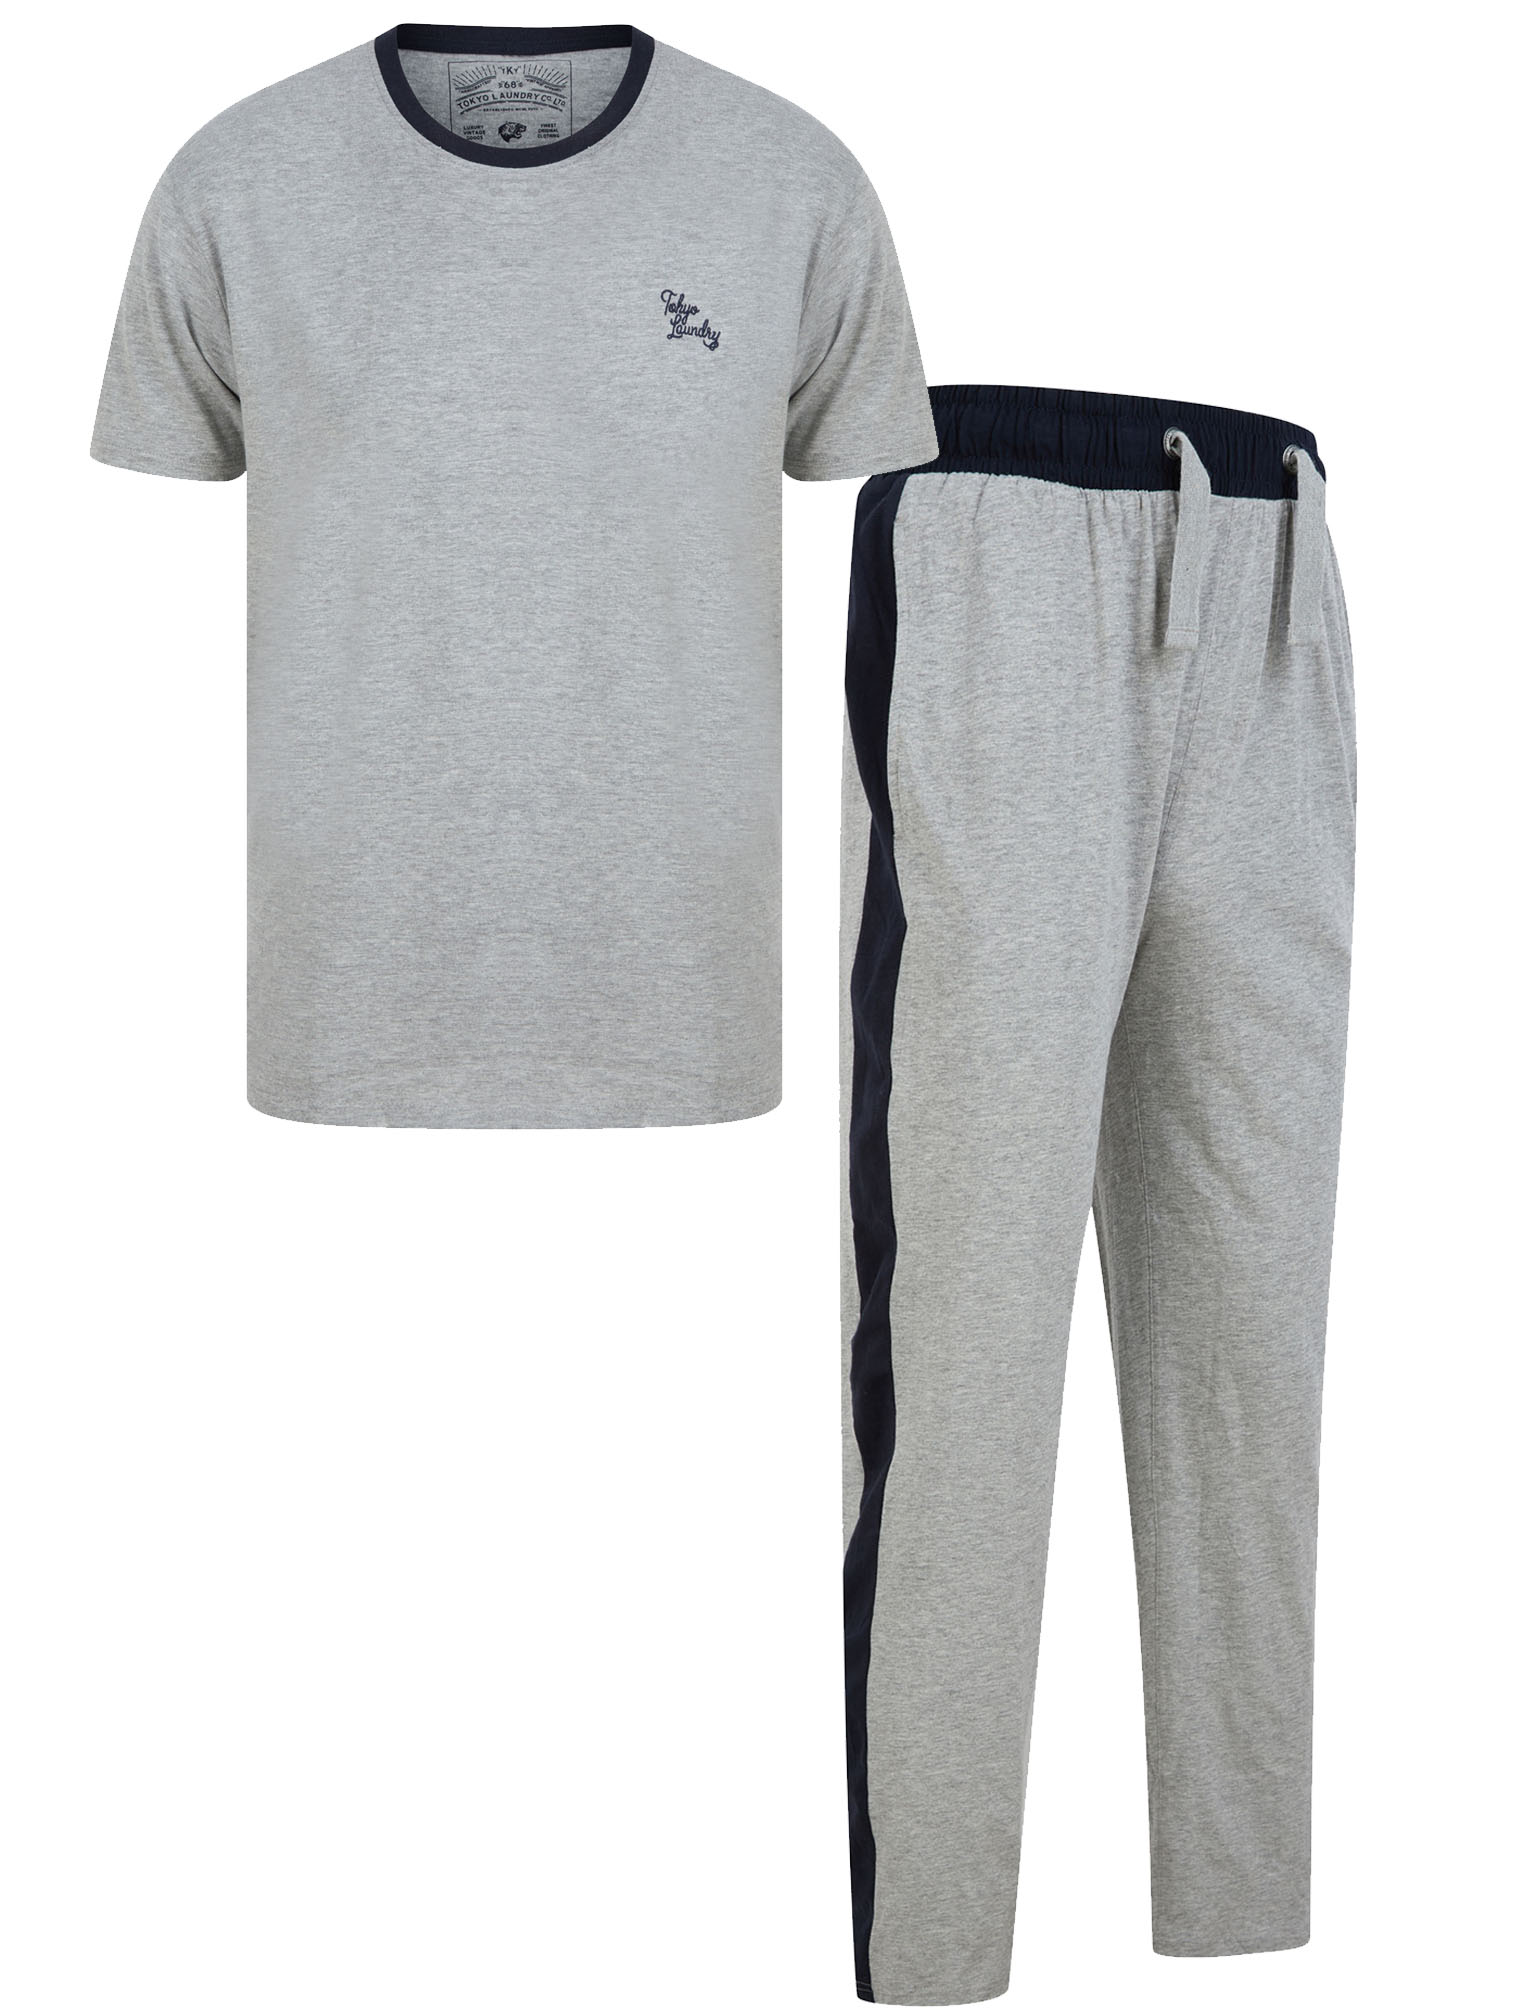 Tokyo Laundry Mens Pyjama Set with Check Bottoms & Short Sleeved Top